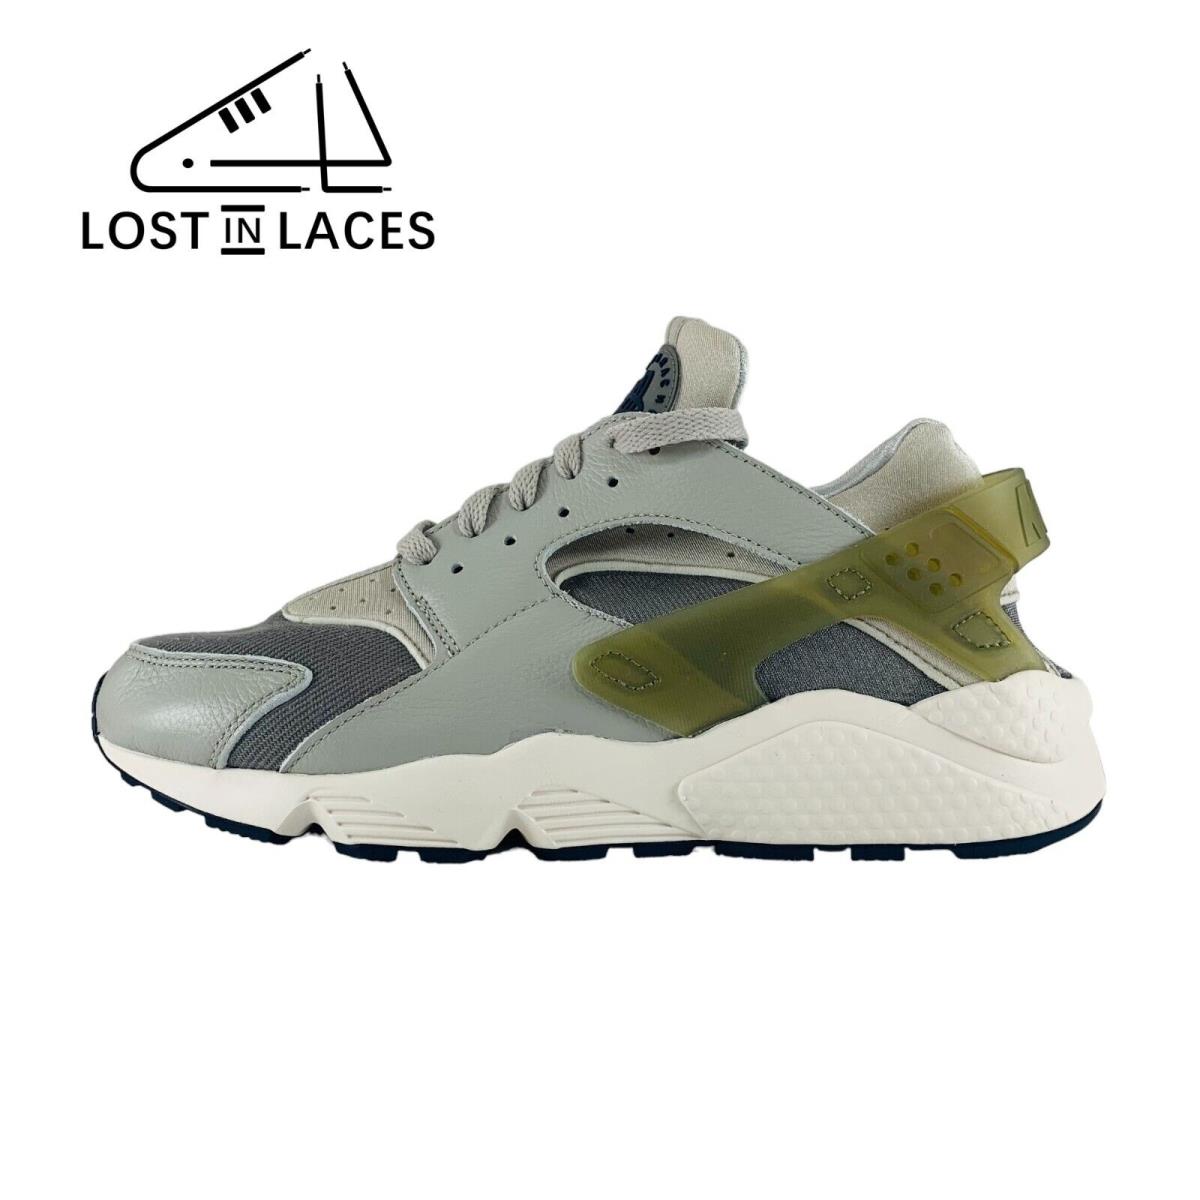 Nike Air Huarache Flat Pewter Grey Lifestyle Sneakers Shoes Men`s Sizes - Gray